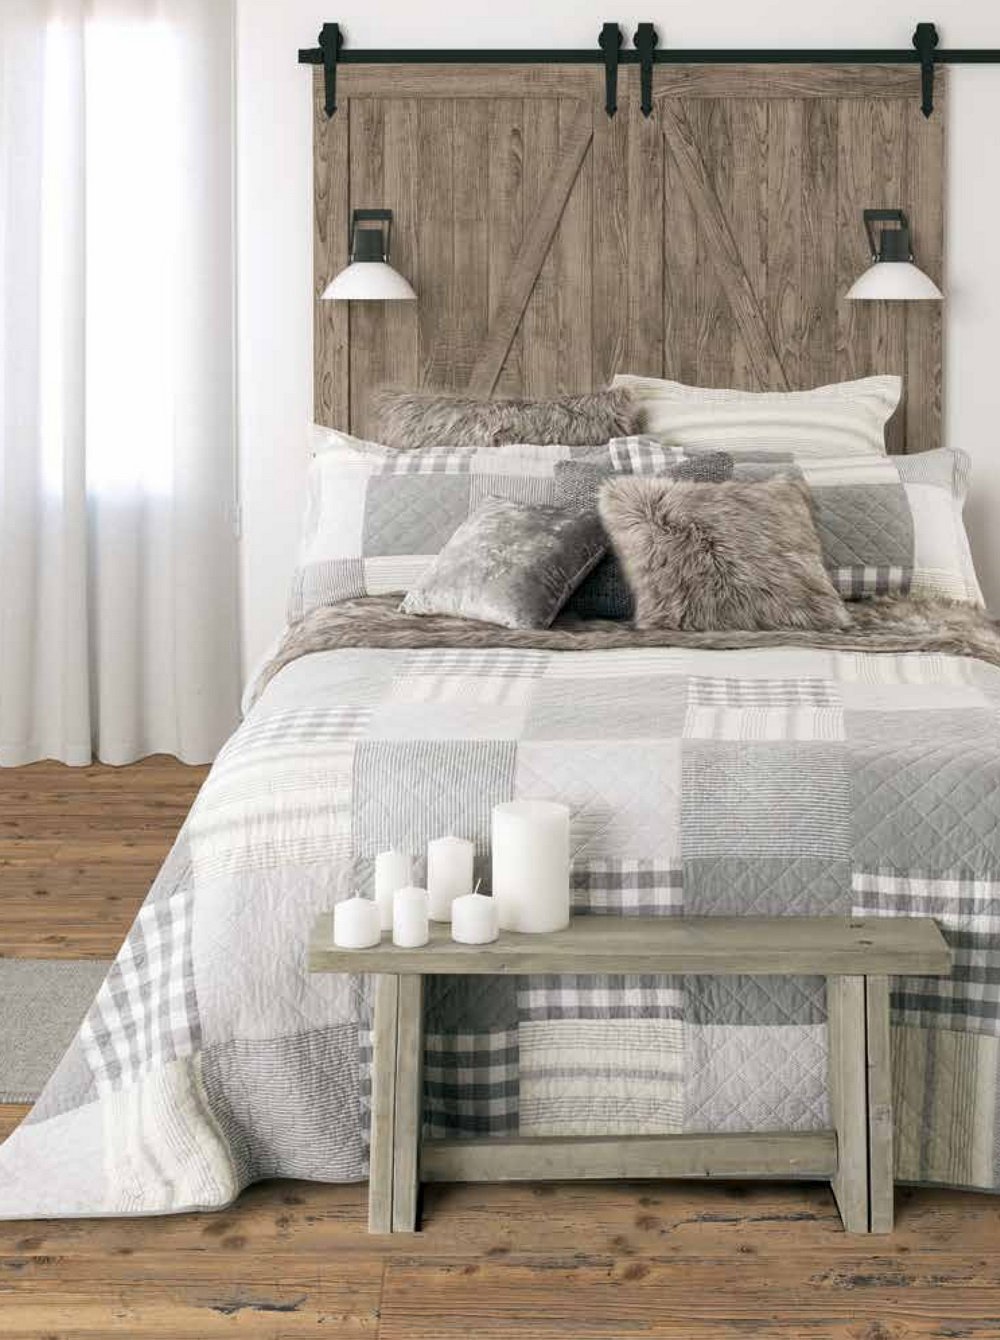 Cottage, a Bedding collection from Brunelli